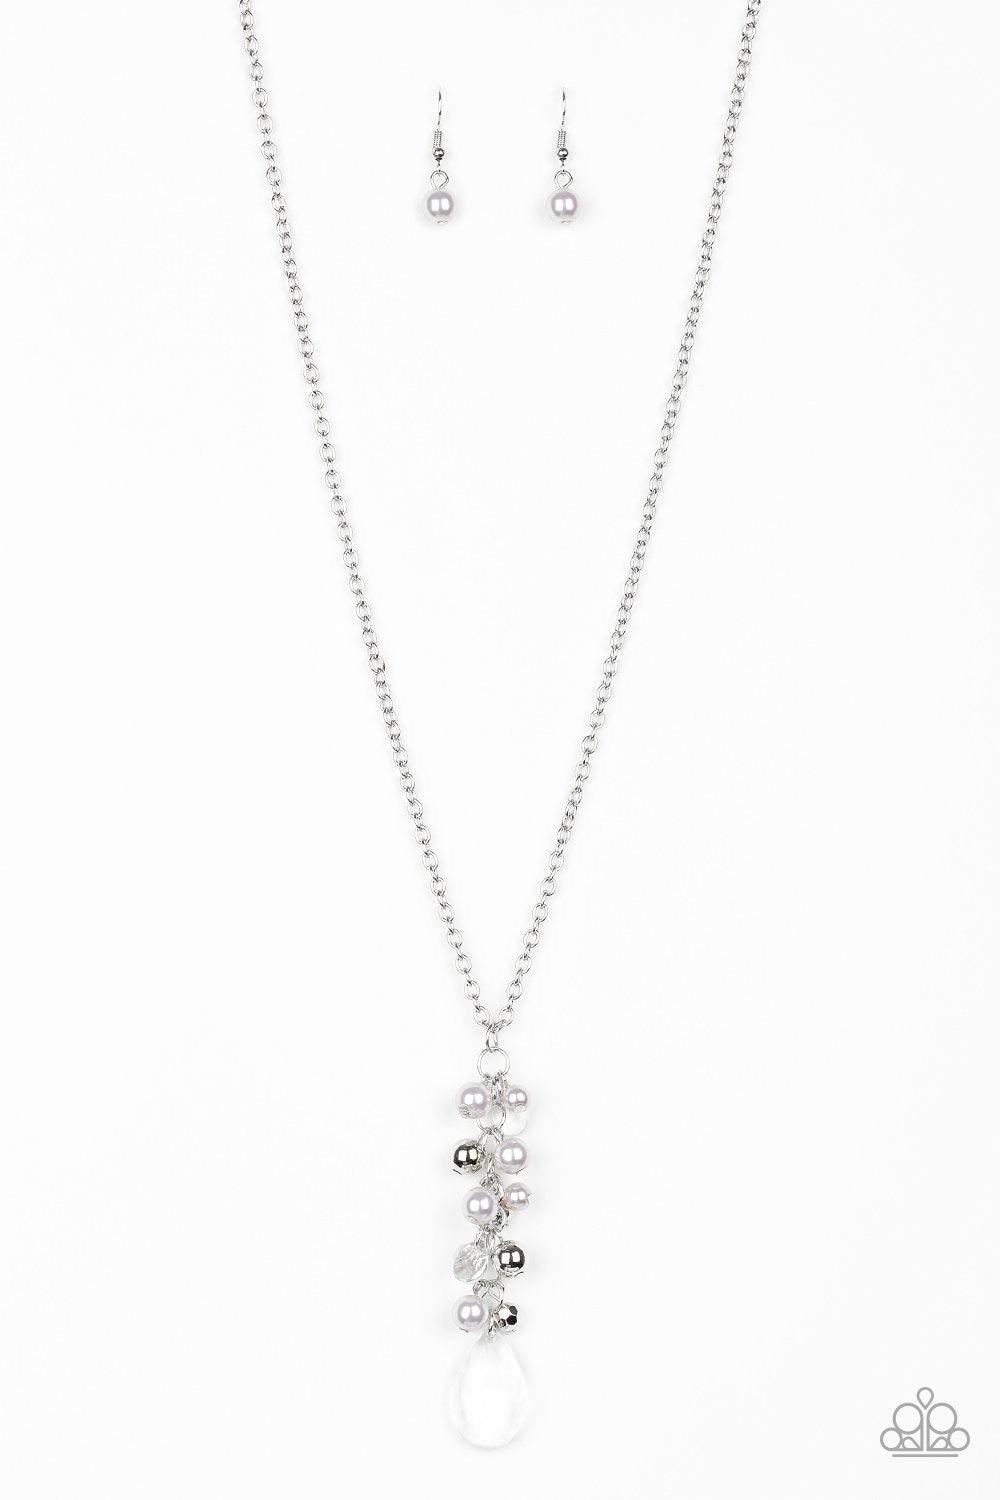 Paparazzi Accessories Teardrop Serenity - Silver A collection of gray pearls, shiny silver beads, and glassy white teardrops trickle along an extended chain that swings from the bottom of a classic silver chain. An over sized teardrop swings from the bott